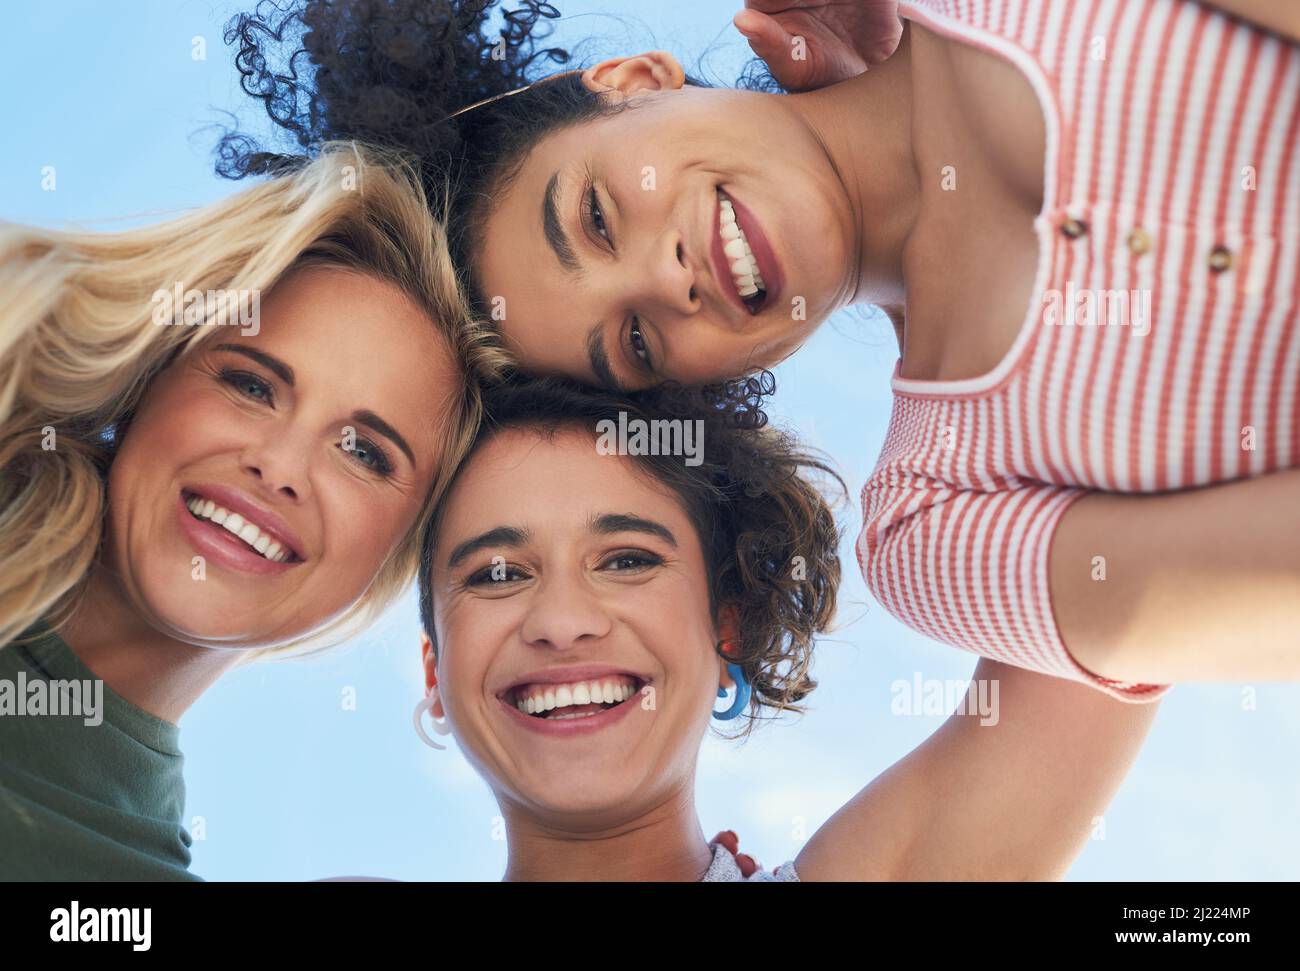 Our friendship is what matters most to us. Shot of three female friends smiling down at the camera. Stock Photo